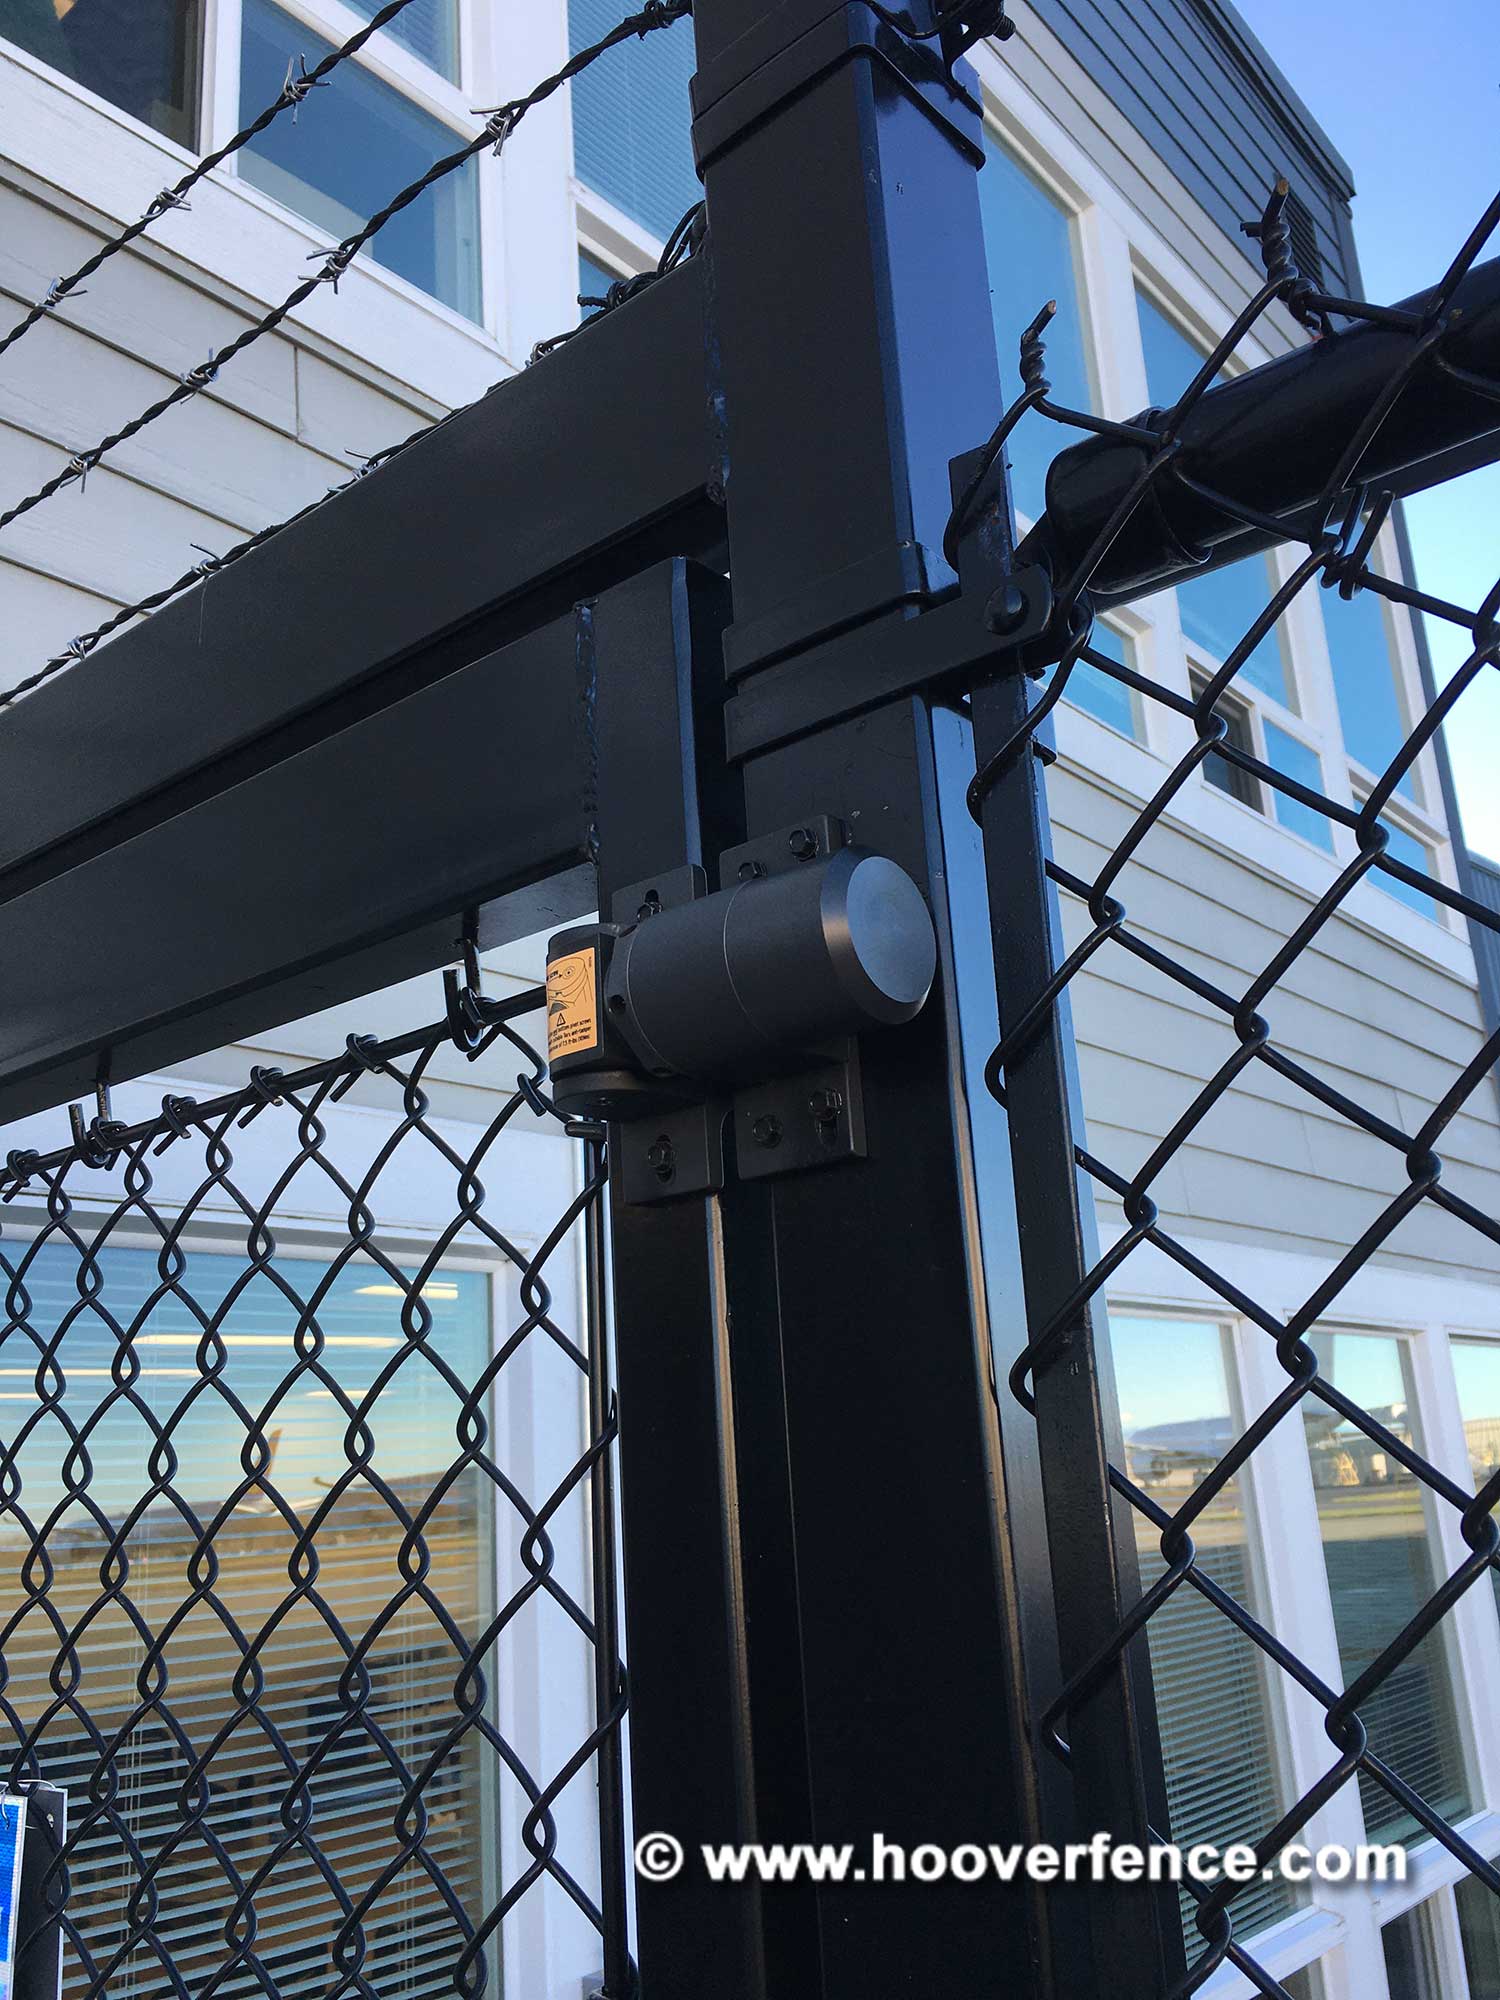 Customer Install - SureClose ReadyFit Hinge and Closer Installed on Black Chain Link Fence Gate with 7403 Gate Stop